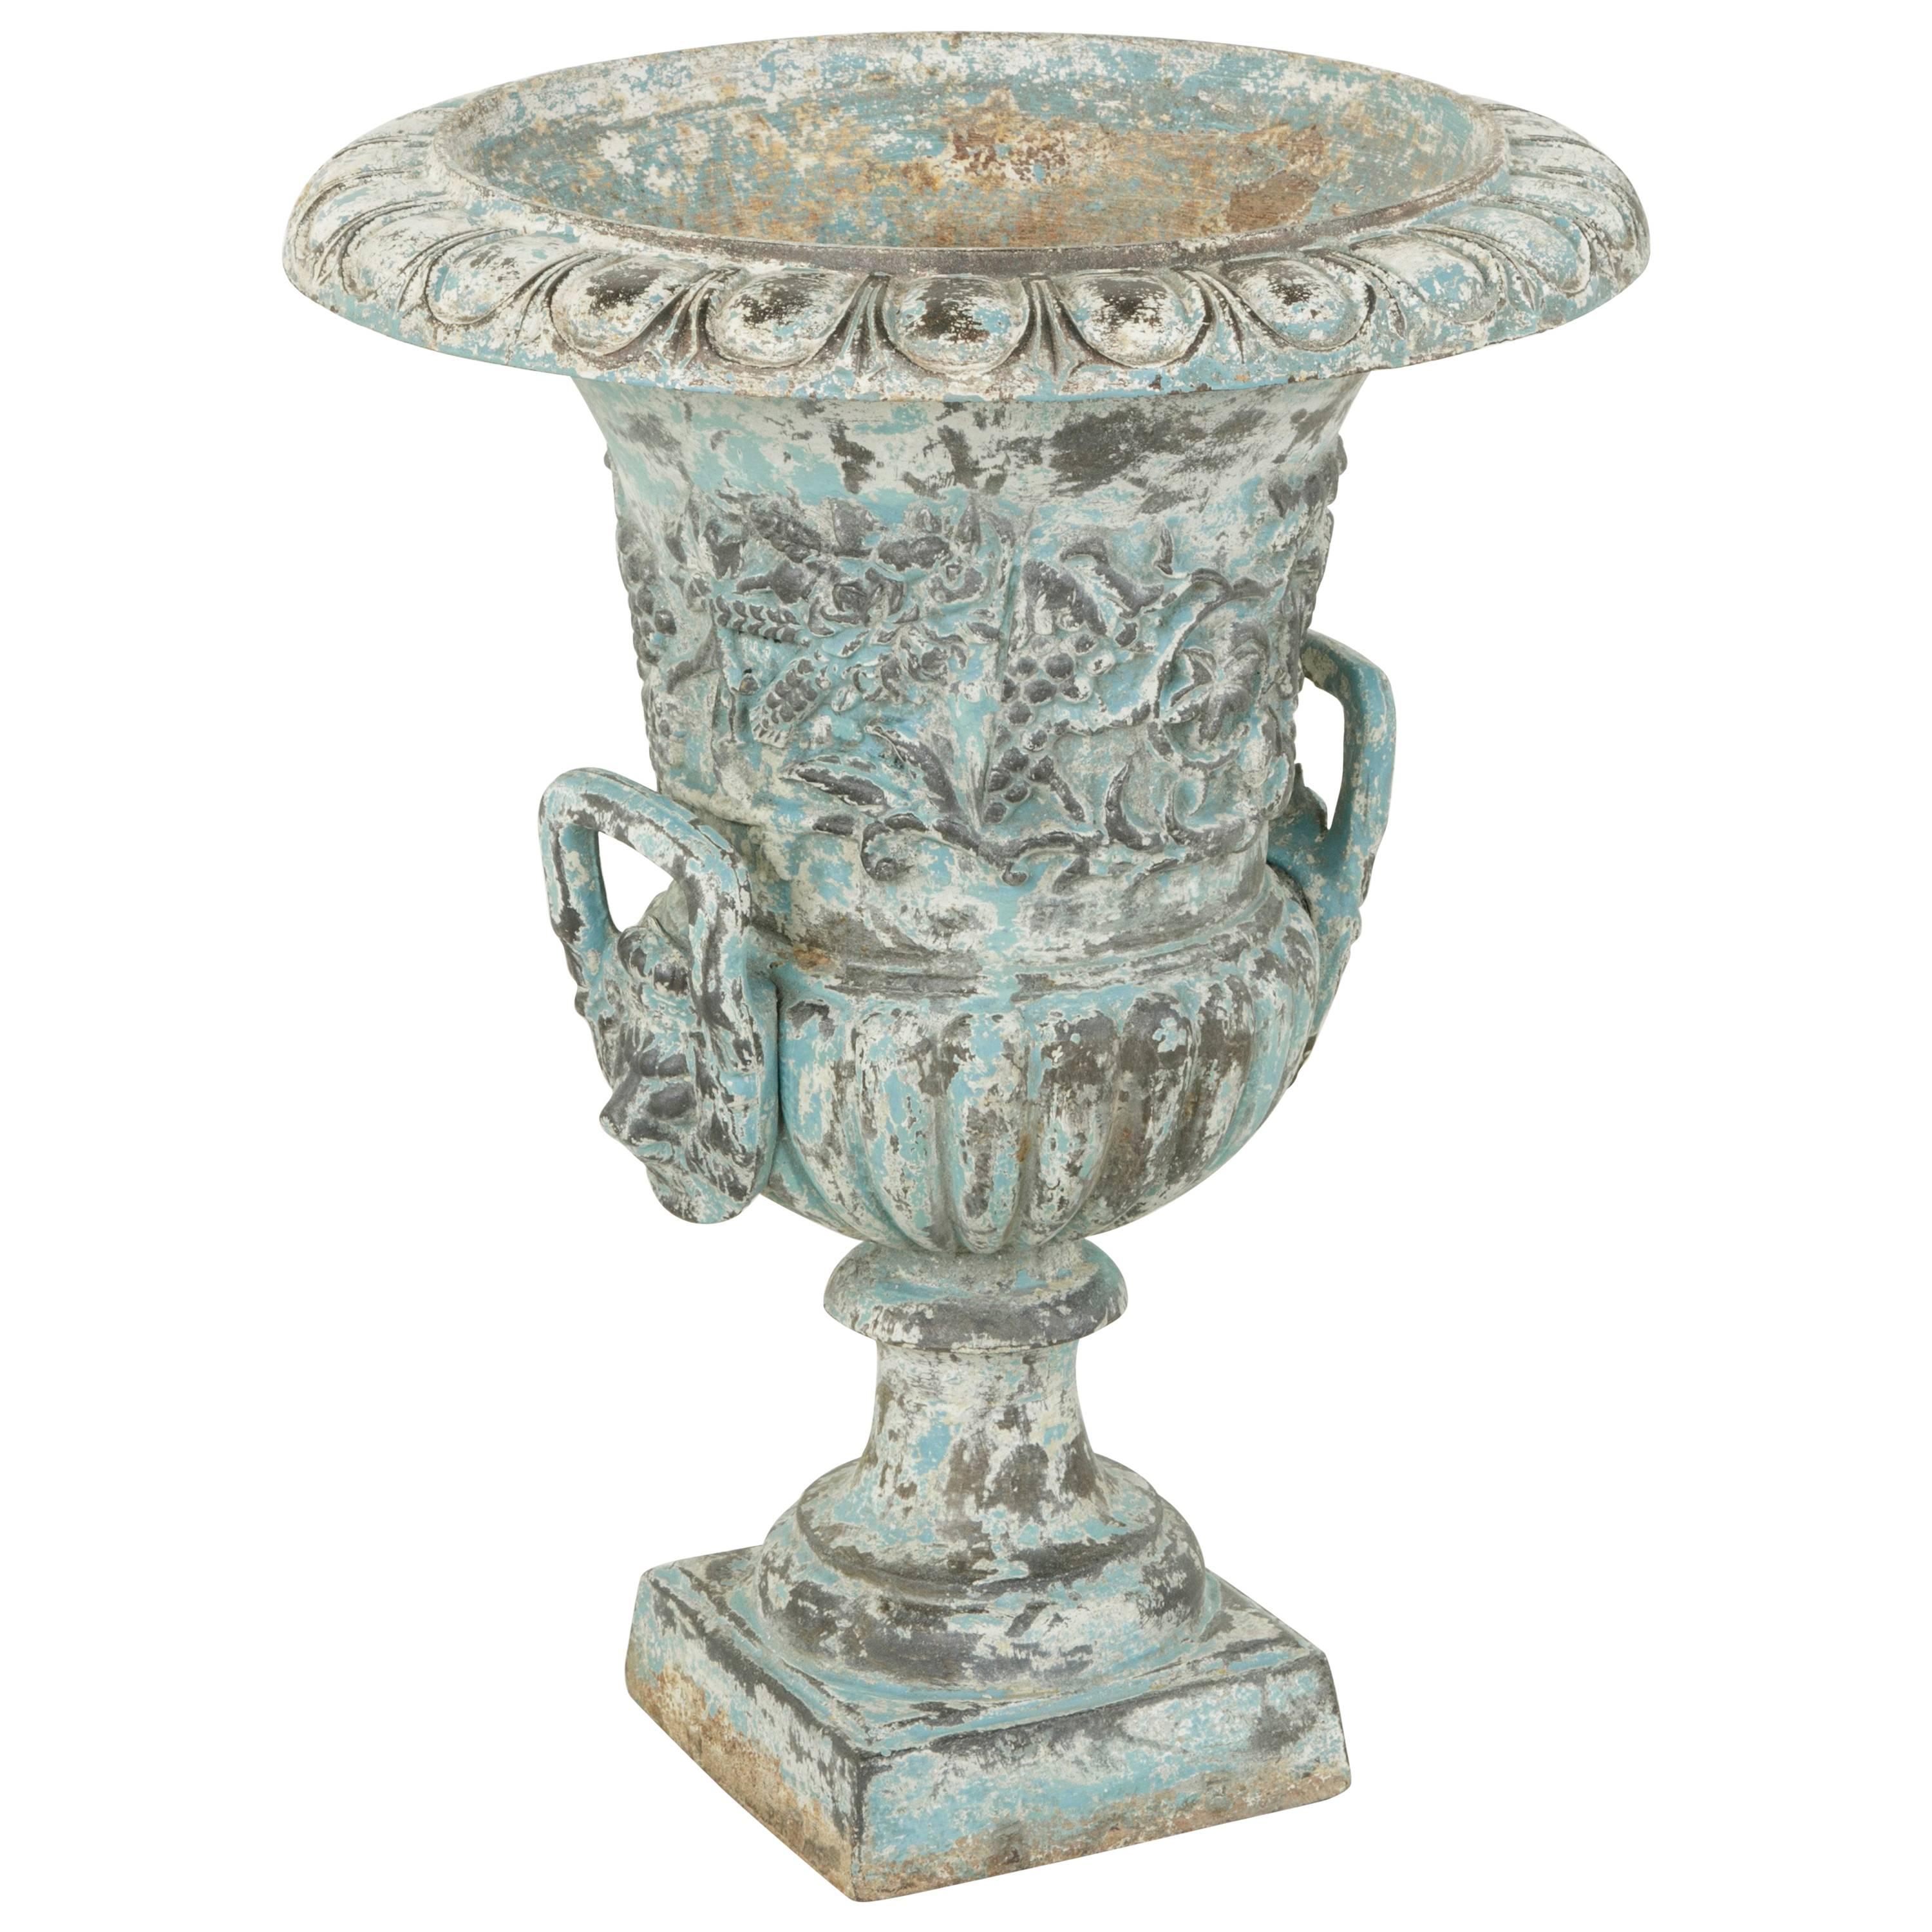 Large Late 18th Century French Cast Iron Urn or Planter Grapes Motif, Blue